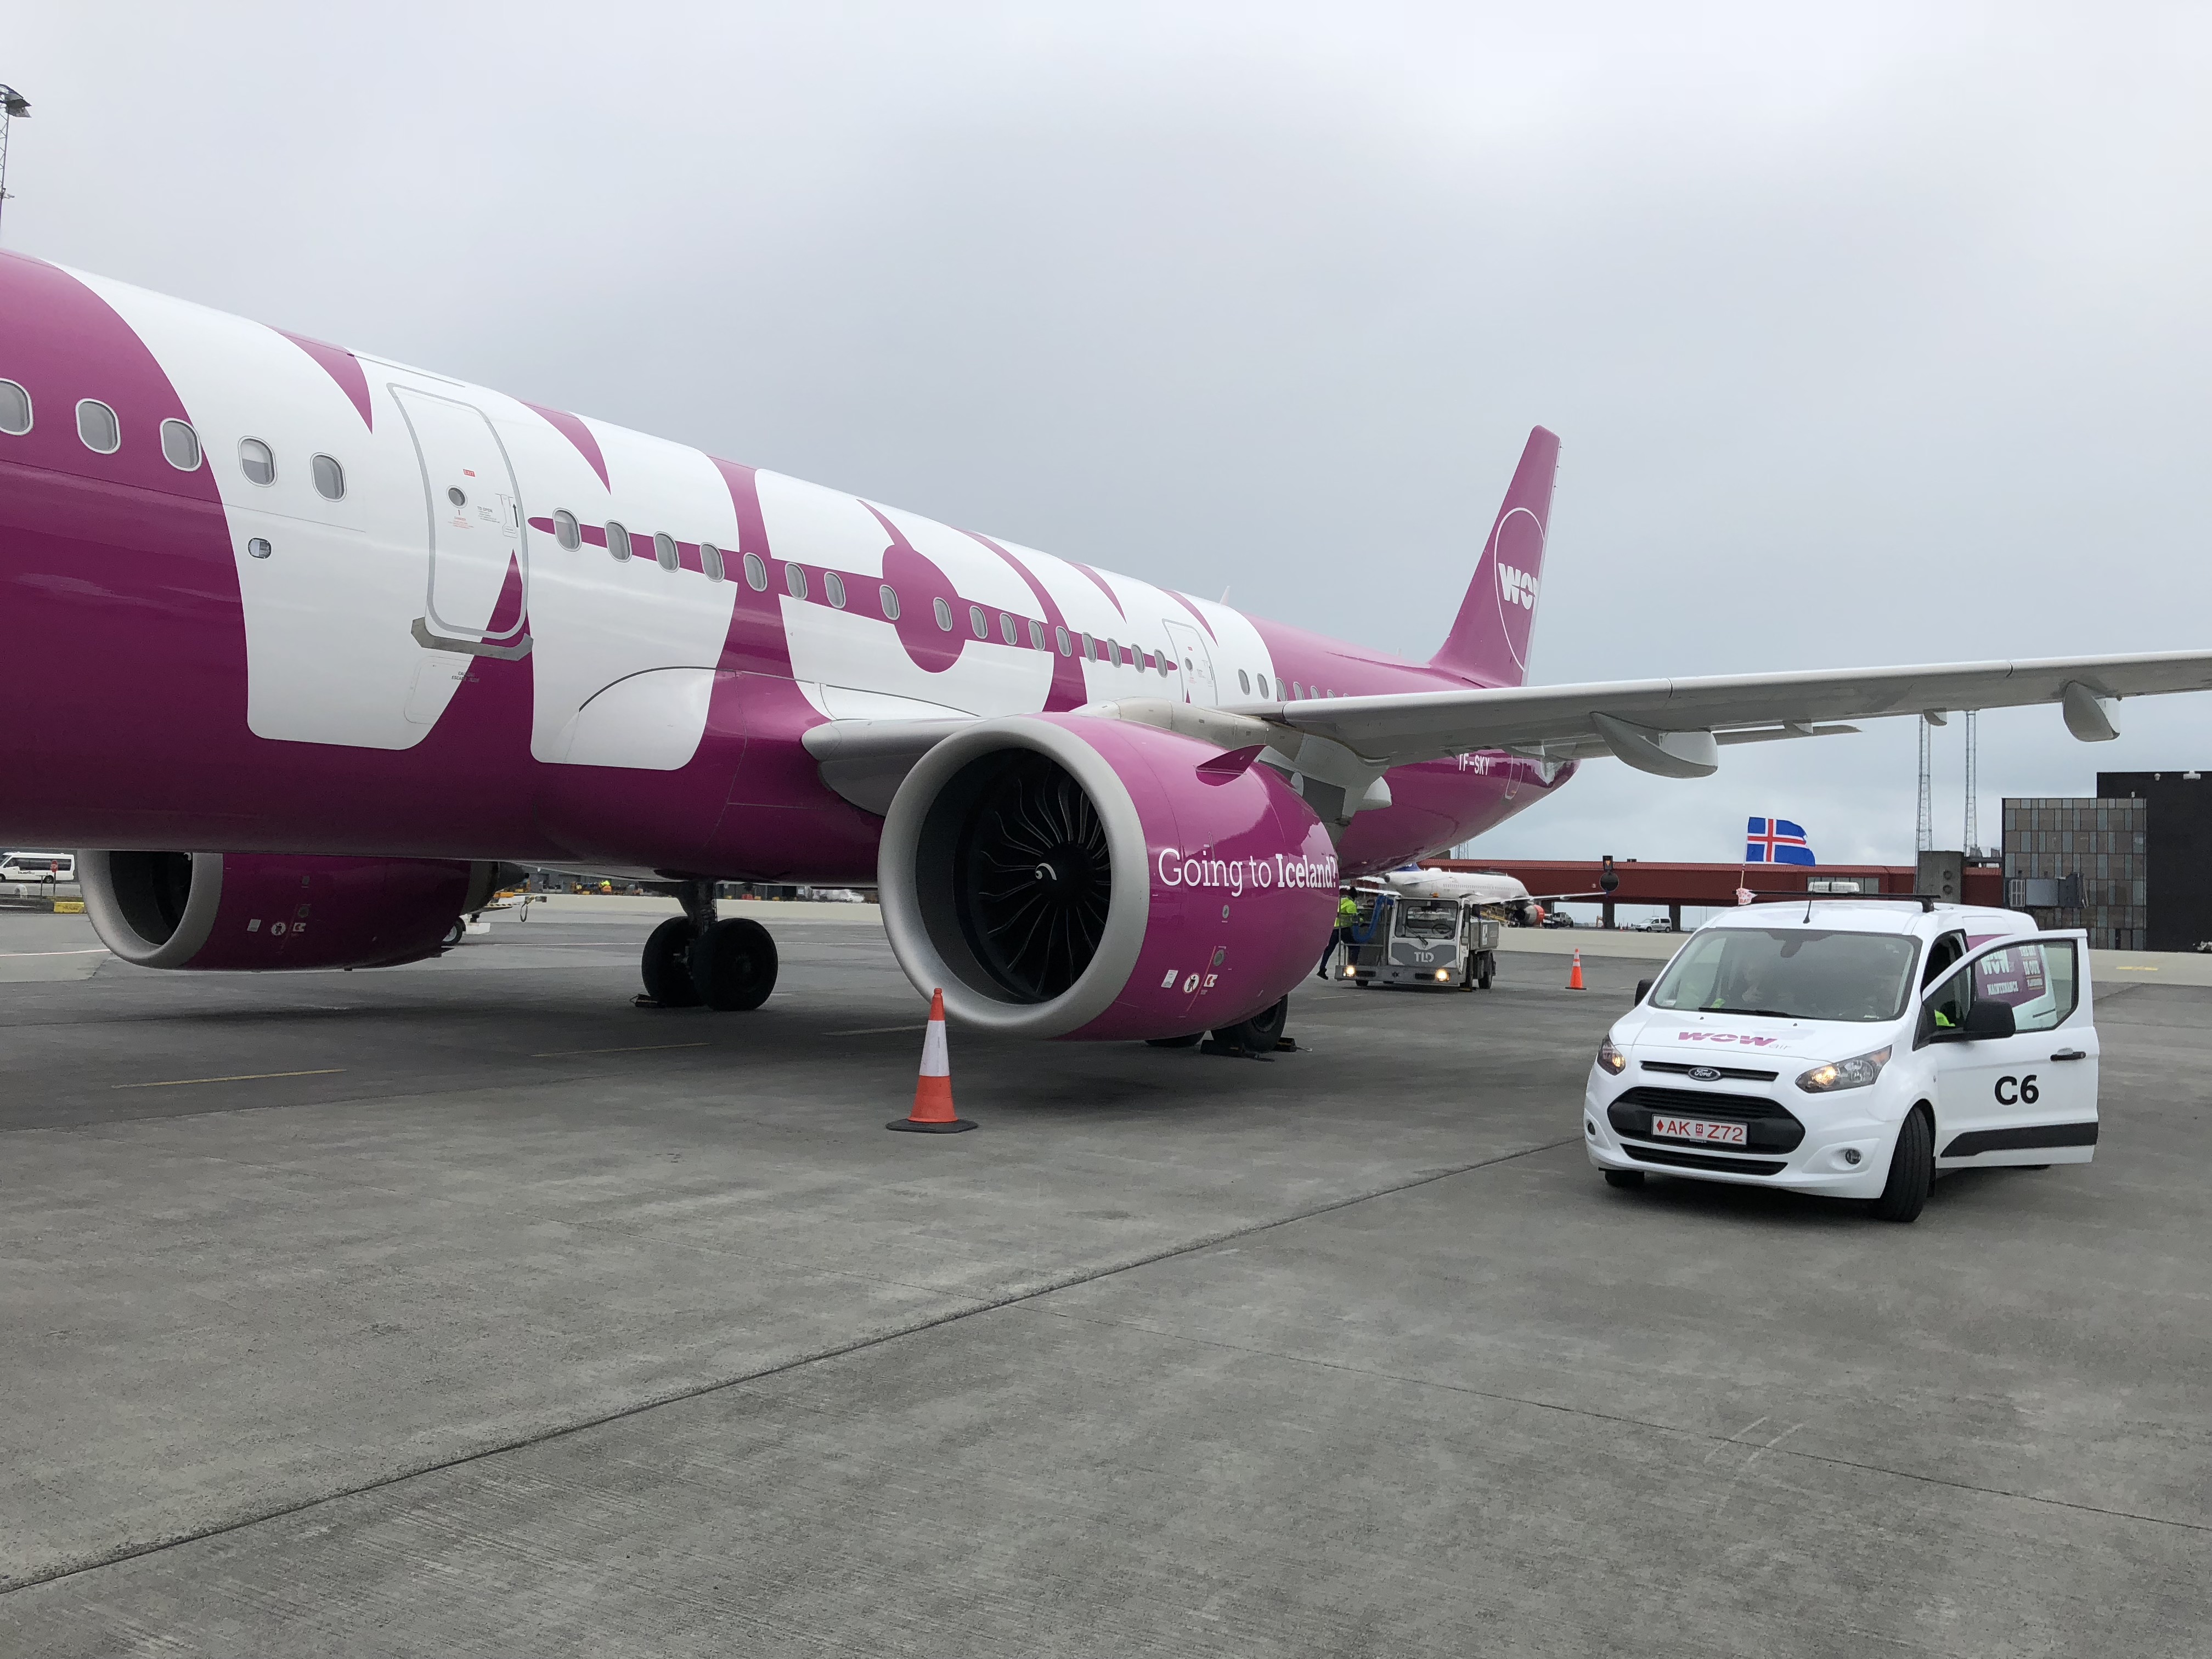 a white car next to a pink and white airplane